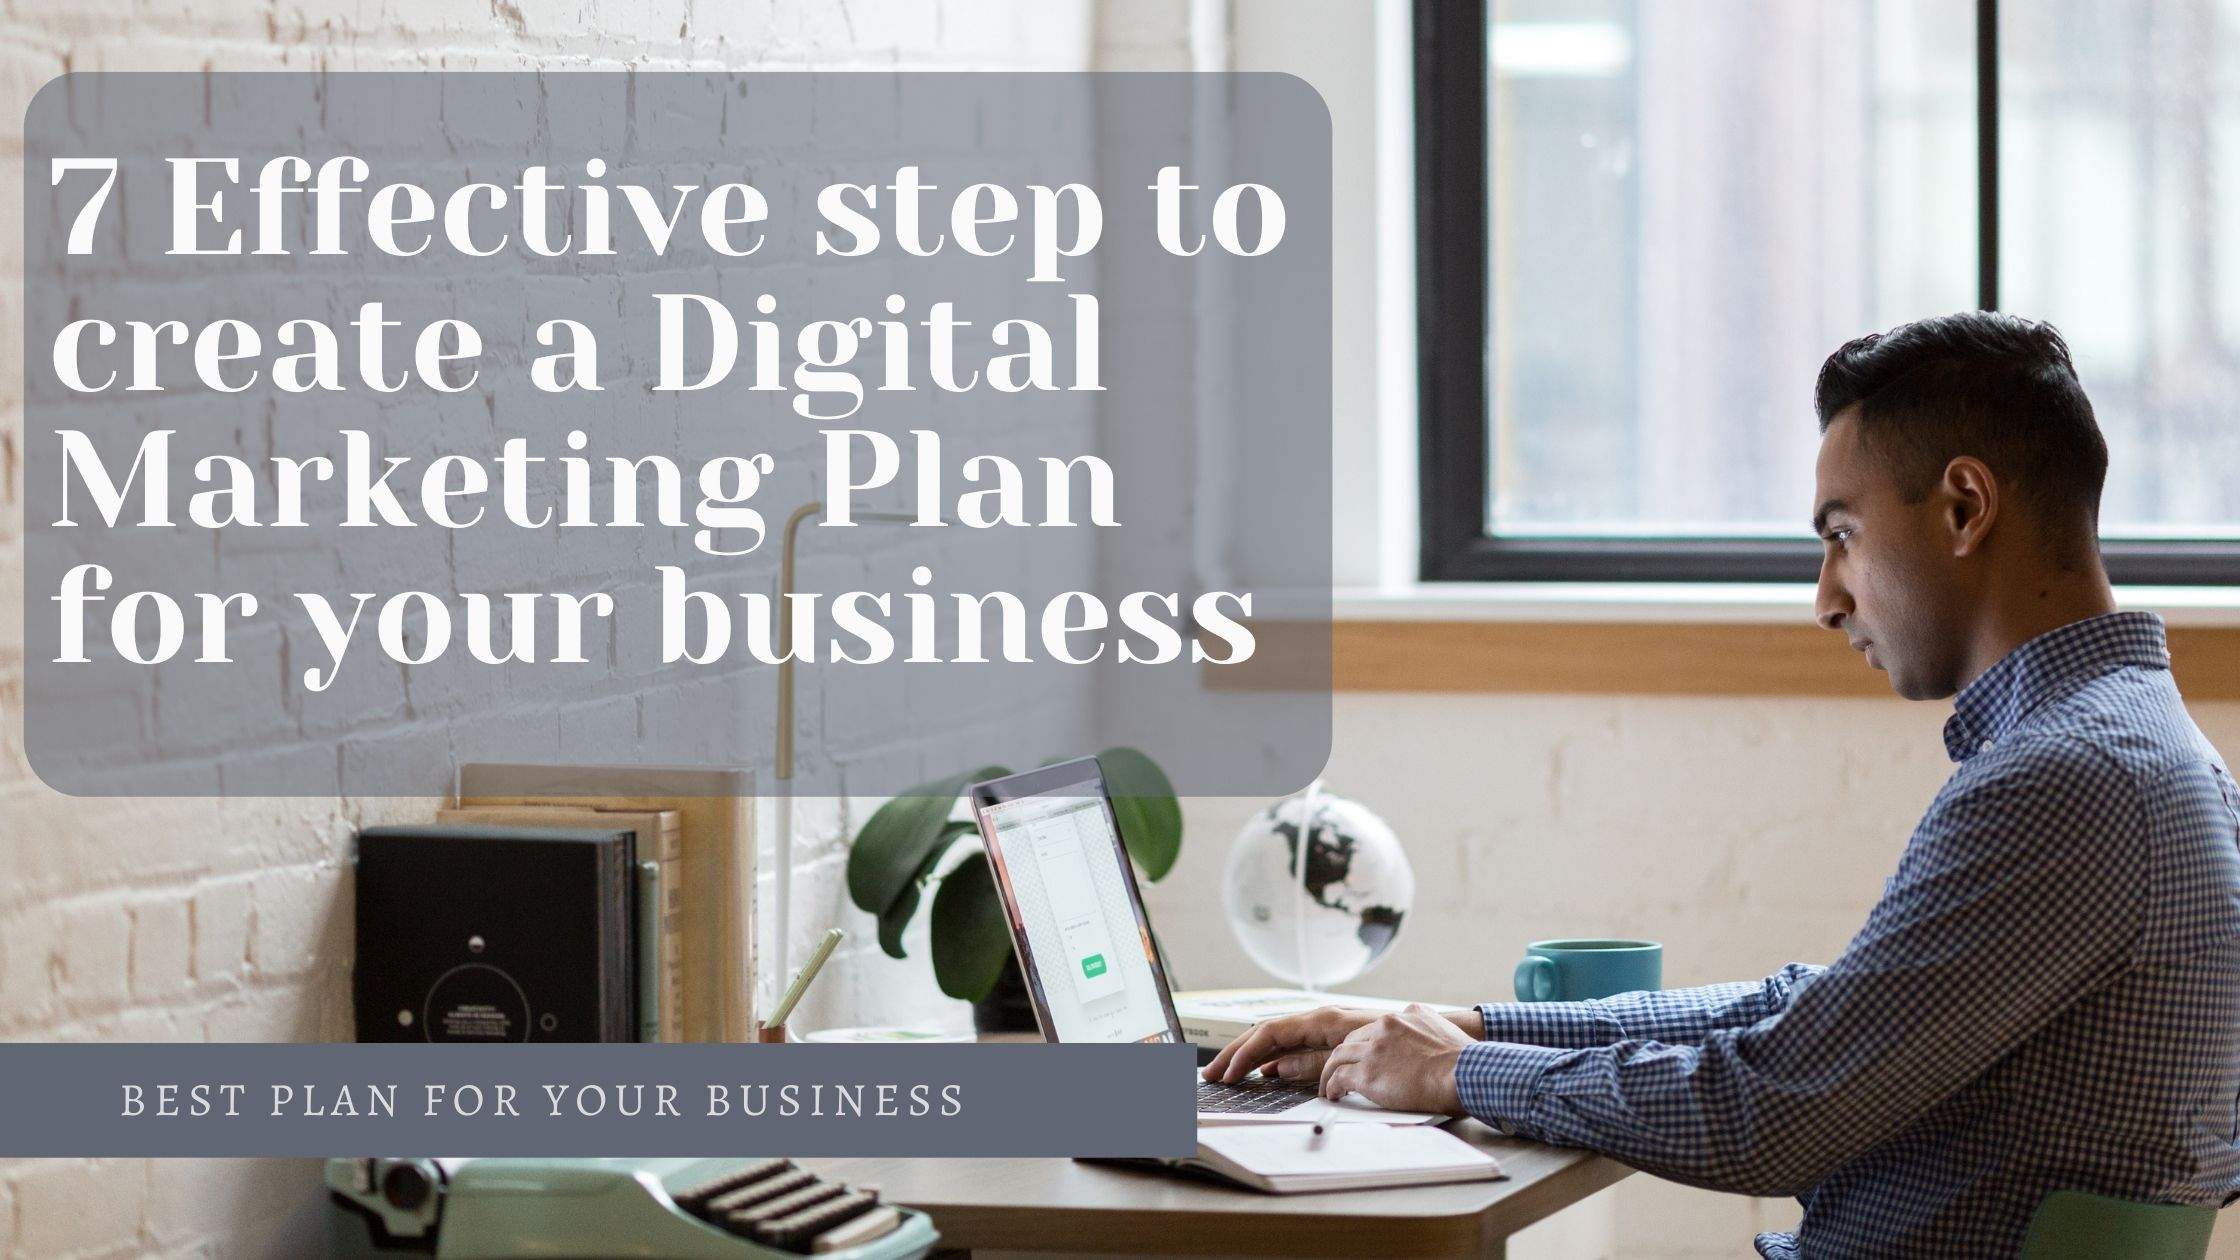 7 Effective step to create a Digital Marketing Plan for your business